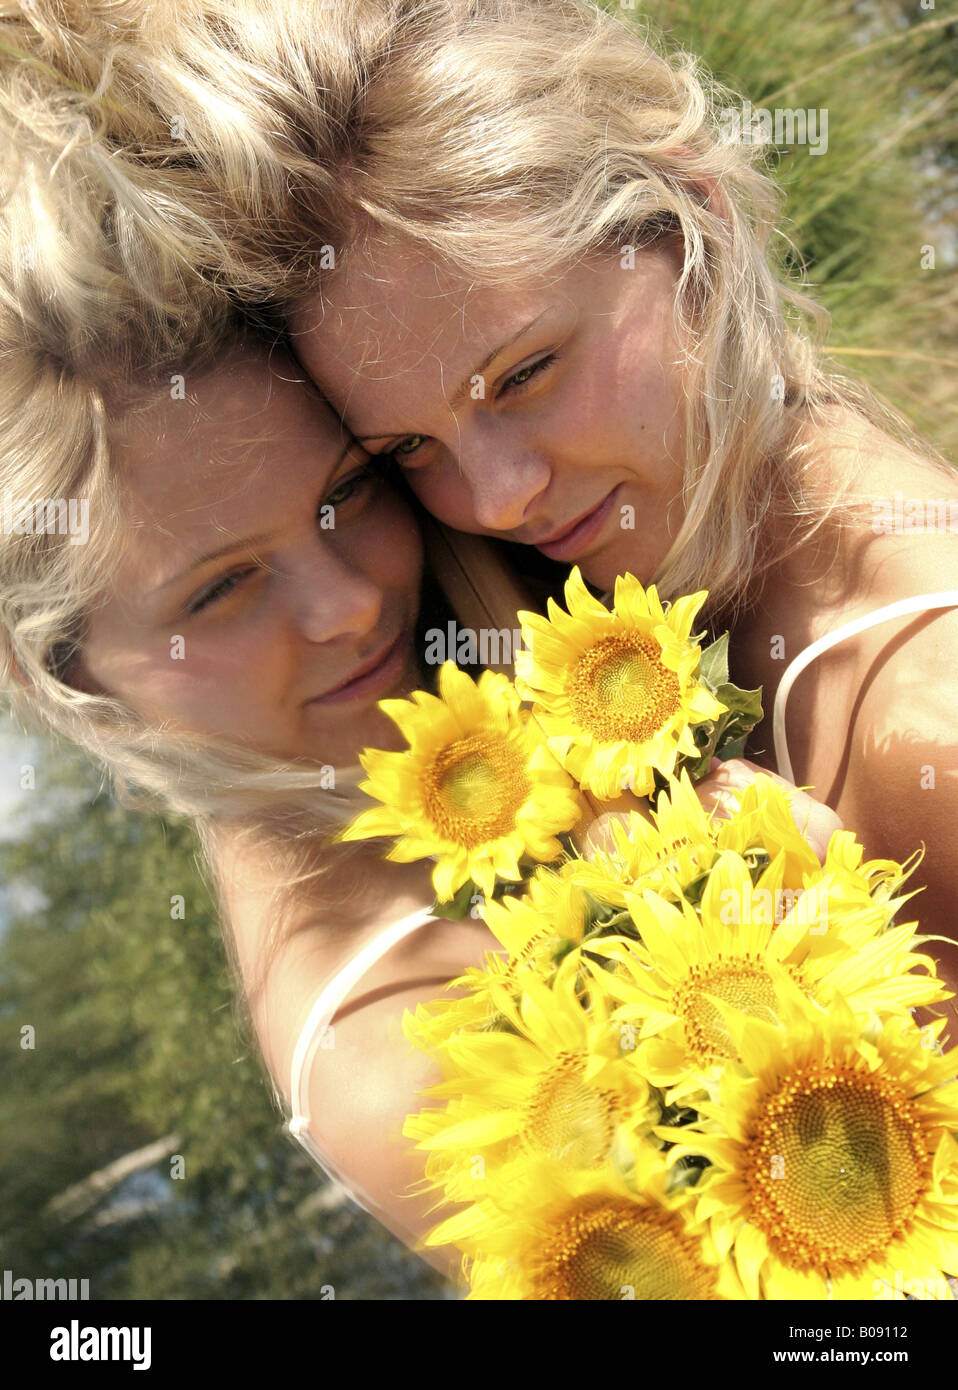 Portrait Of A Joung Fair Haired Women Lying On A Mirror With Sunflowers In The Garden Stock 